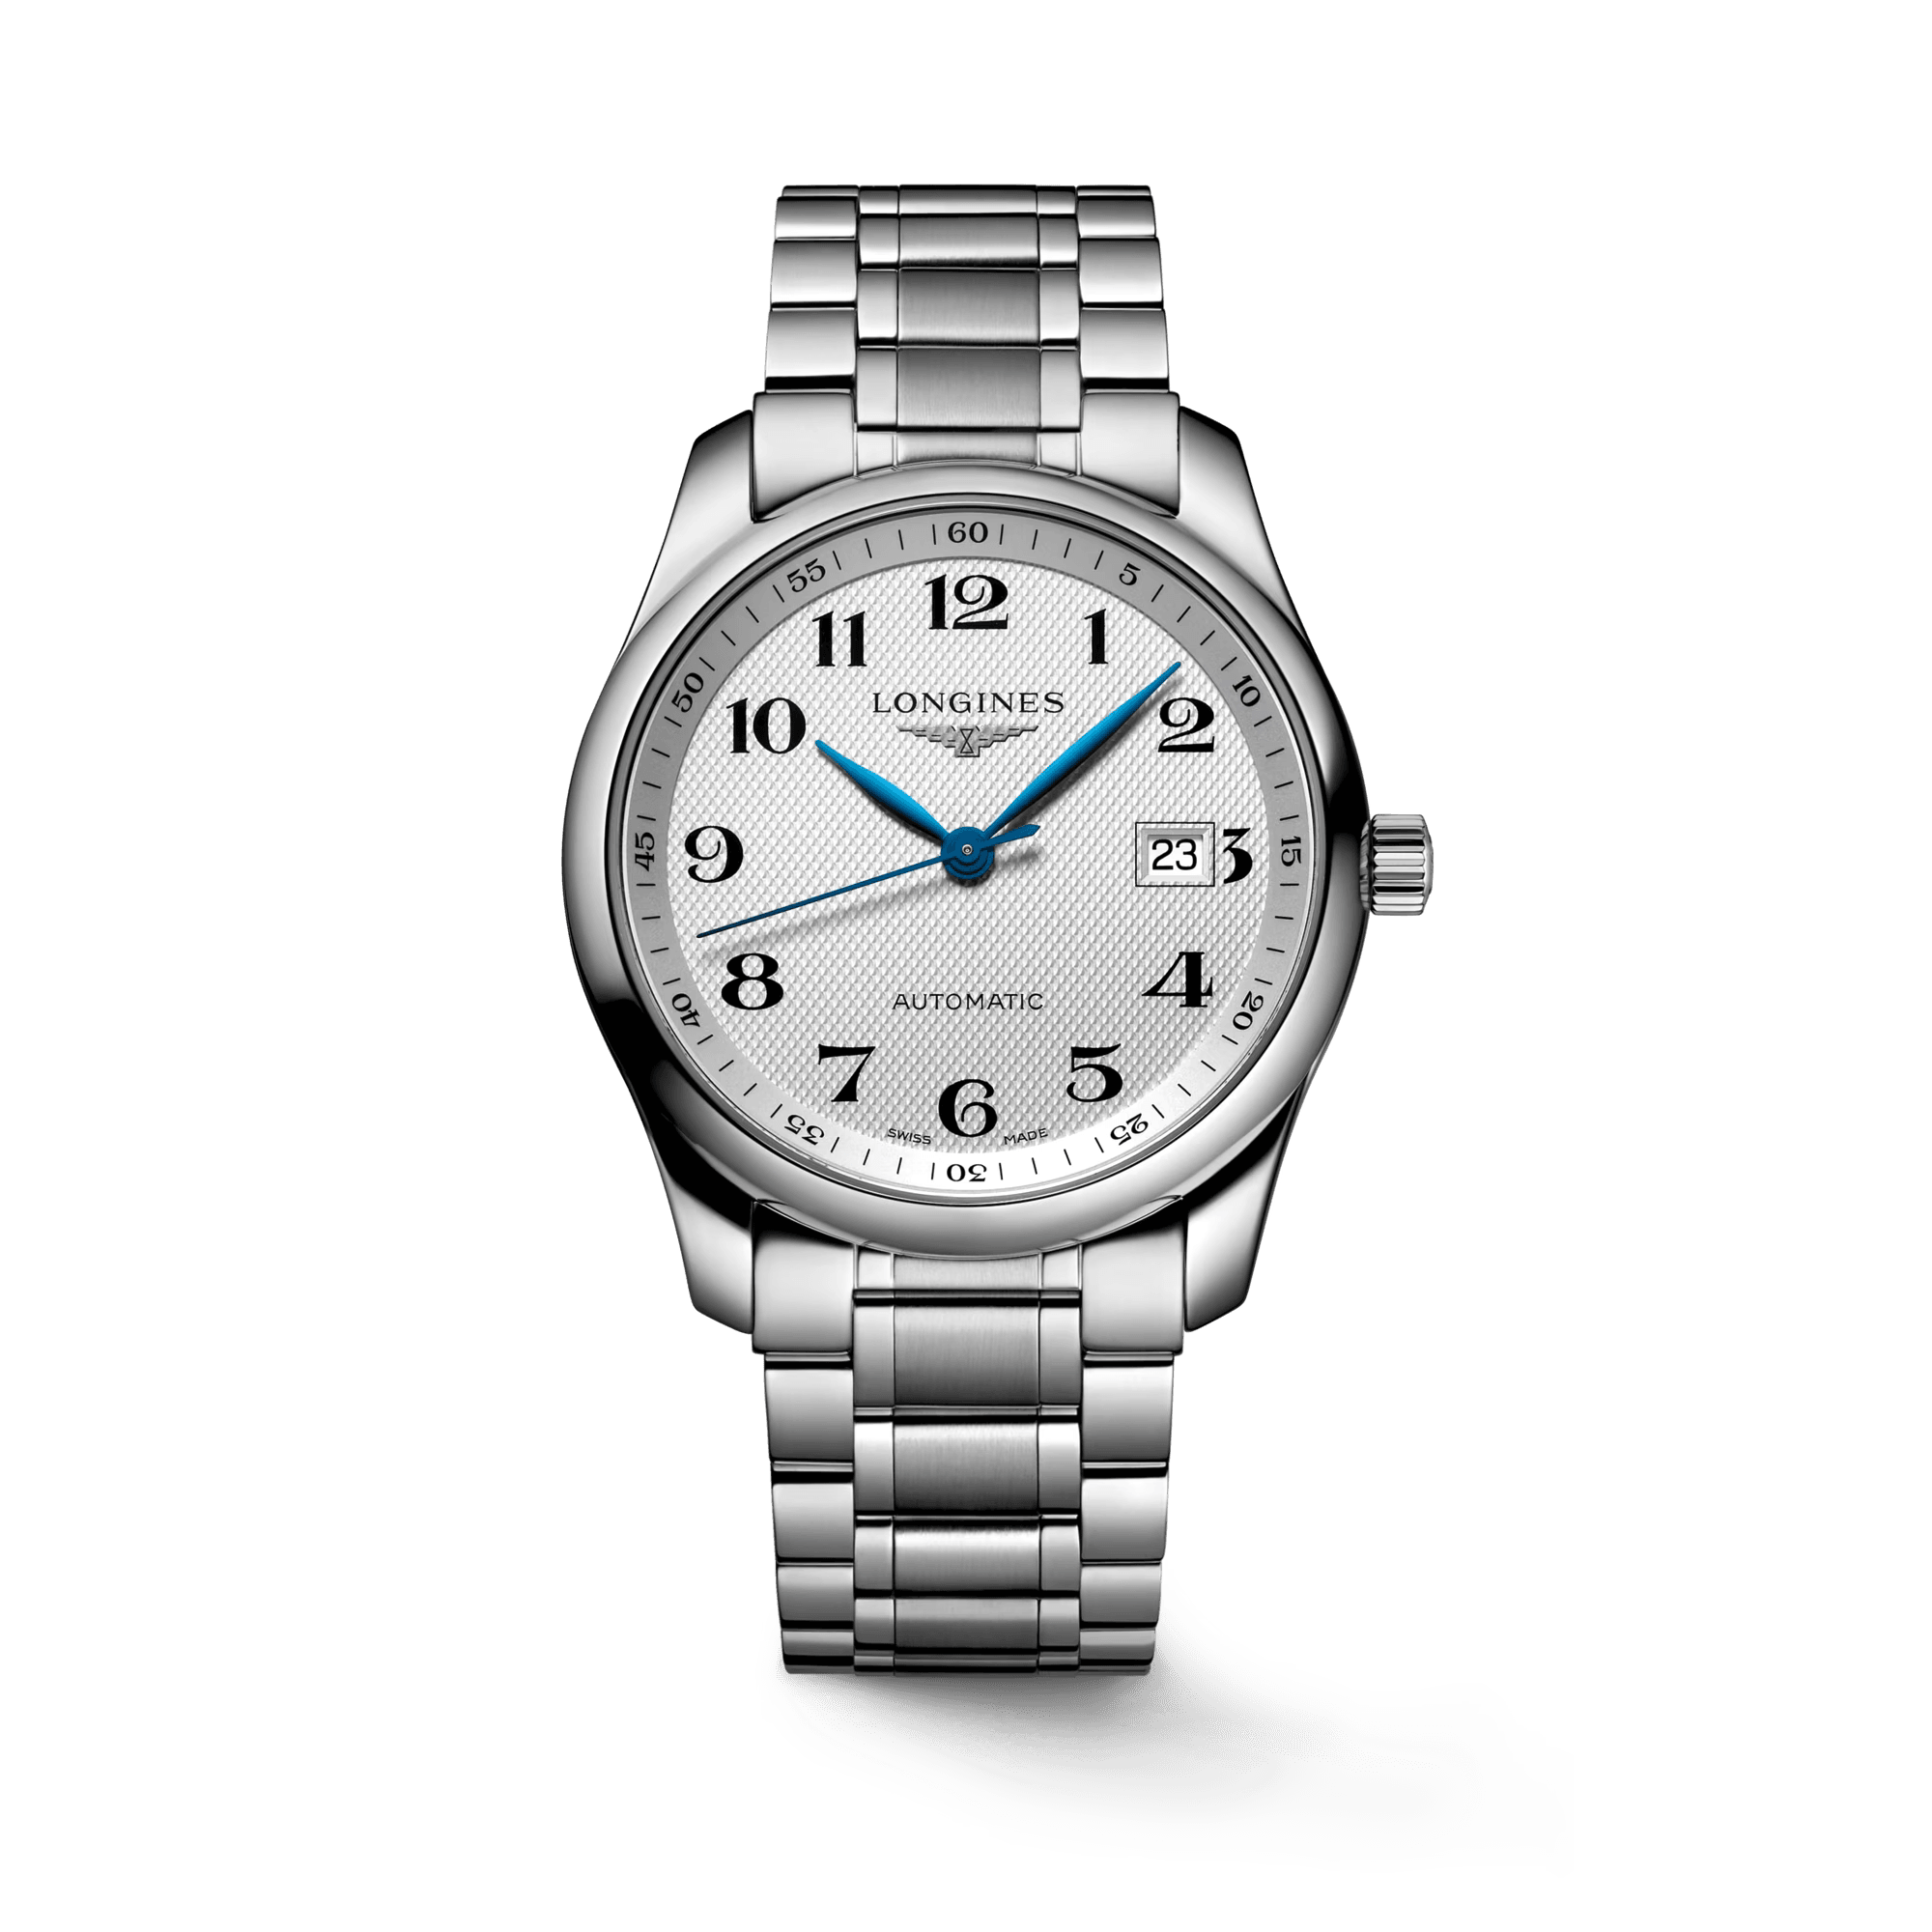 The Longines Master Collection Automatic Men's Watch L27934786